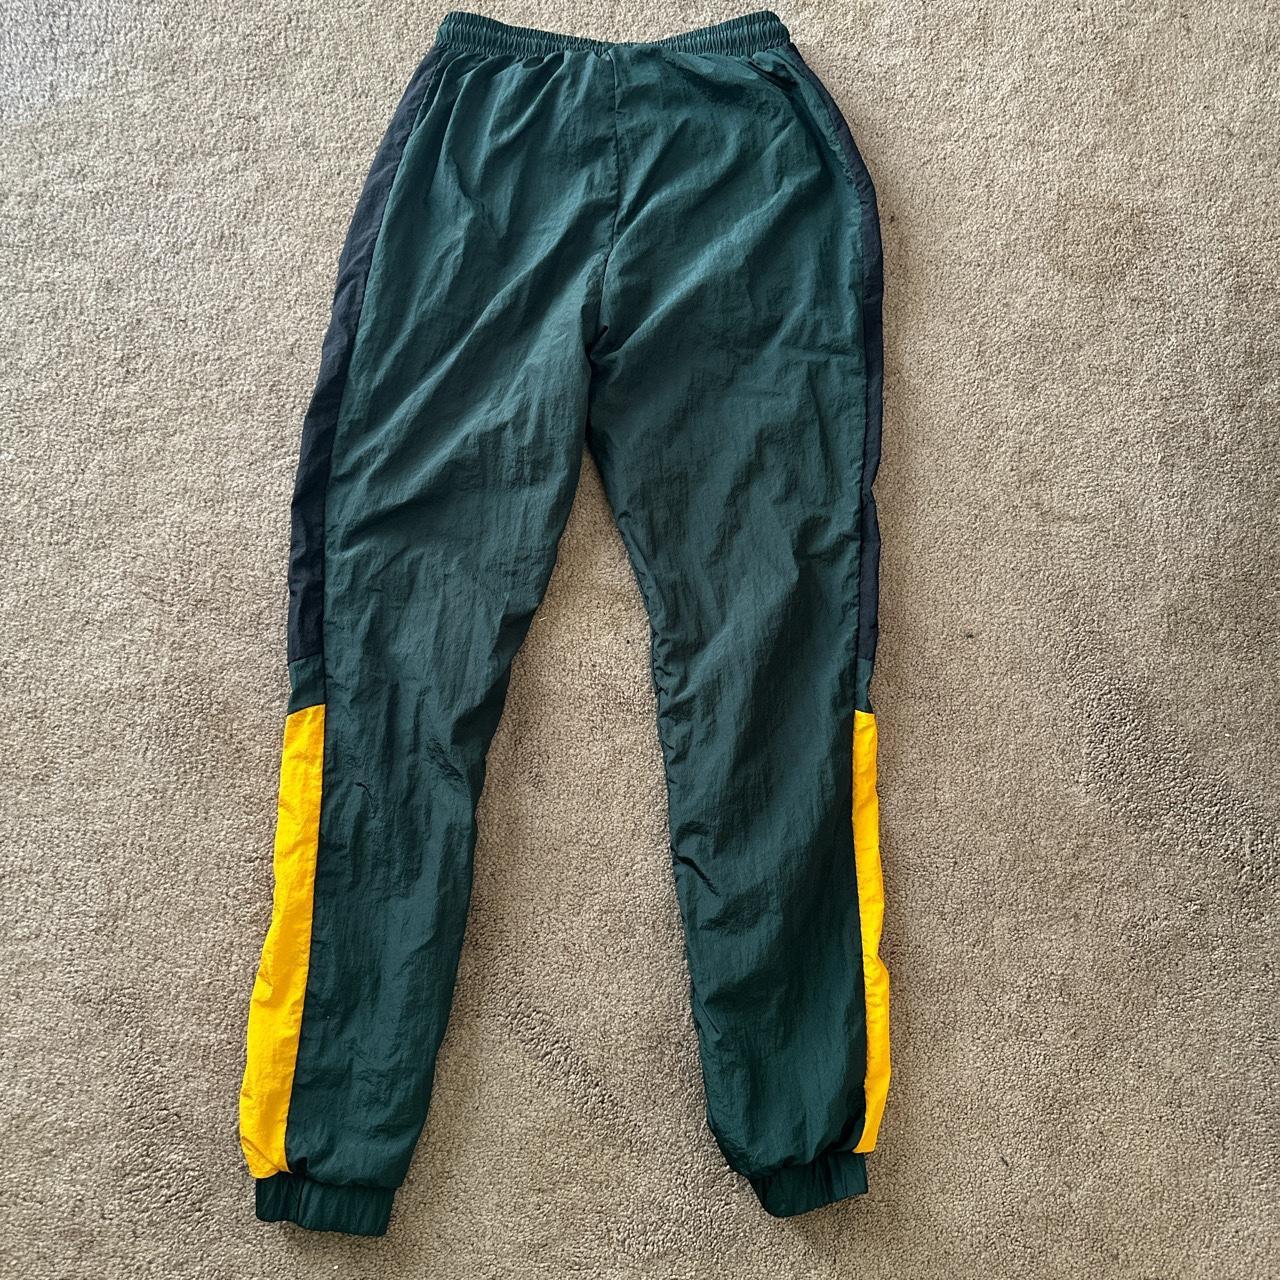 Ellesse Men's Blue and Green Trousers (4)